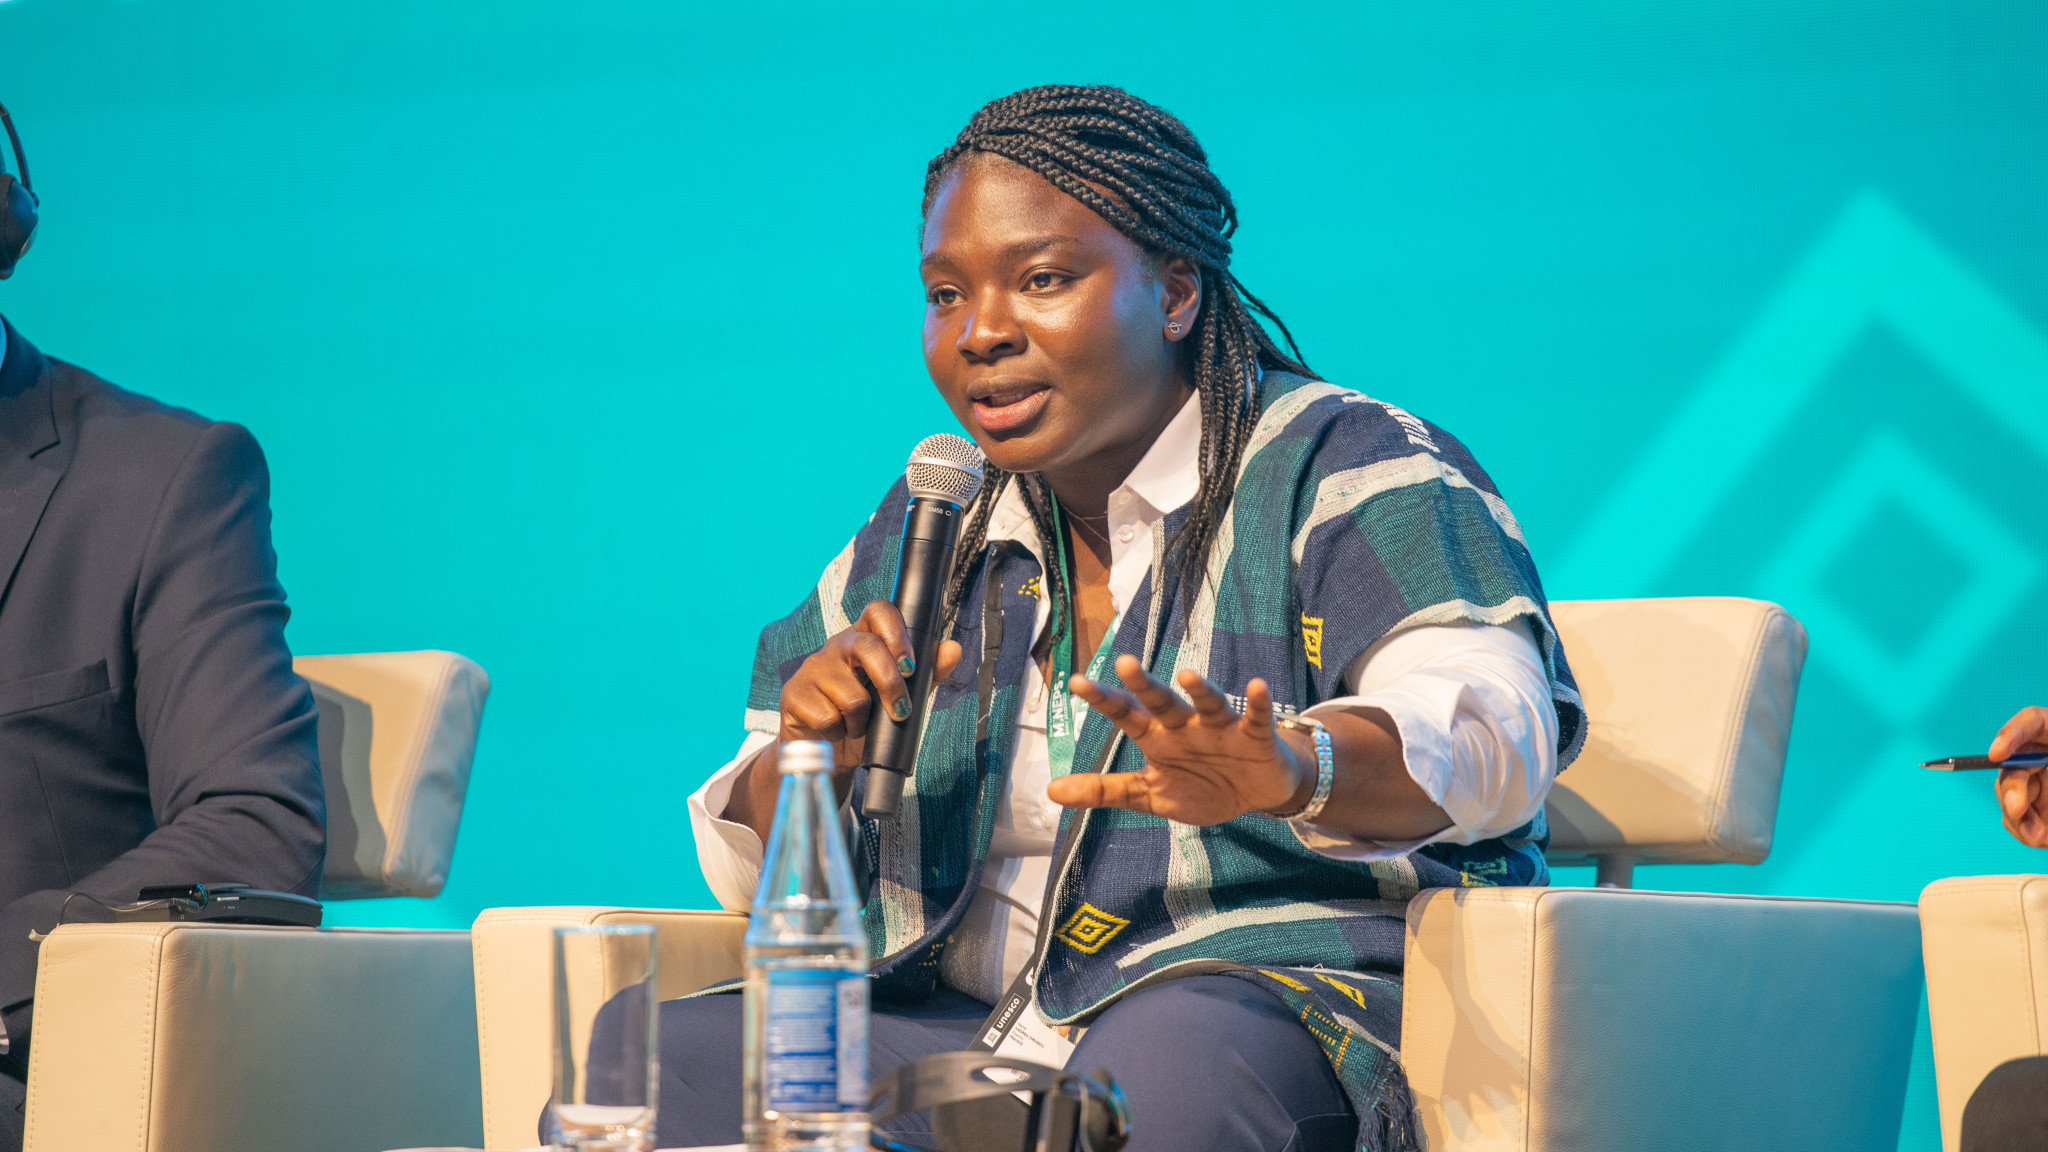 Andrea Dirabou, captain of the Ivory Coast women's rugby union team, spoke about the barriers facing women in sport ©Baku 2023